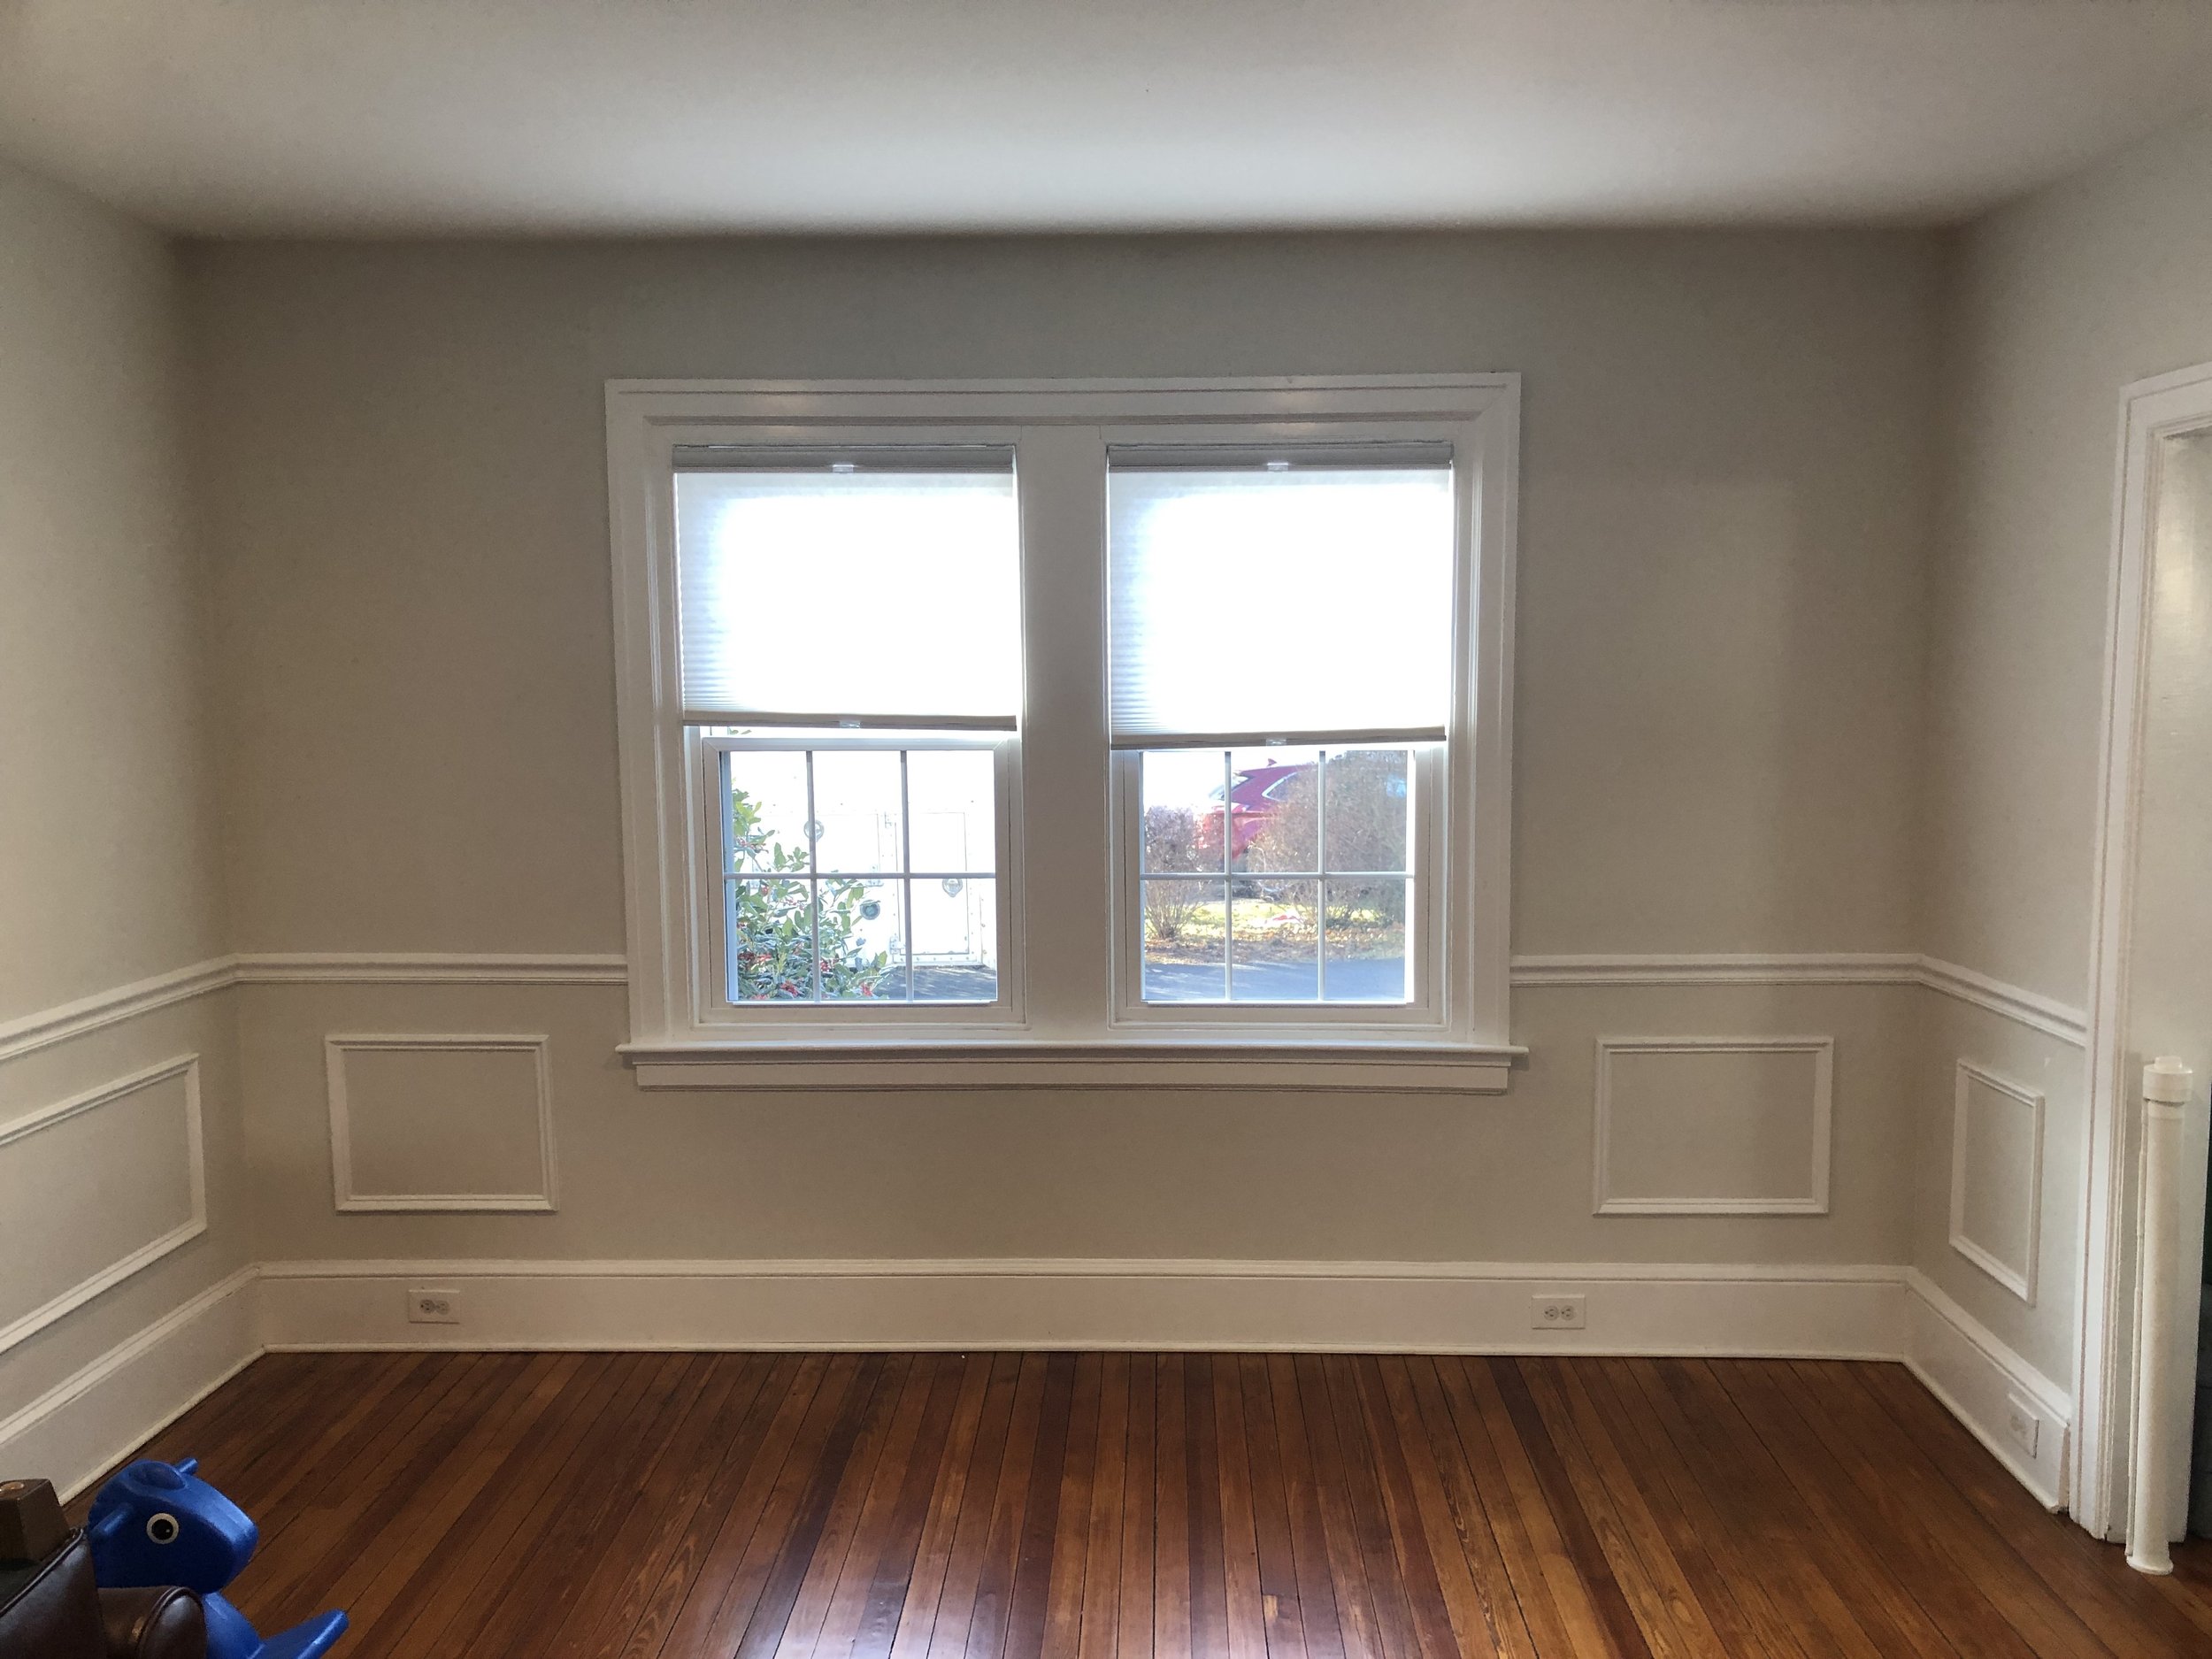  I was hired to create a pair of built-ins in this client’s living room. One unit will go here with the other on the opposing wall across the room.  